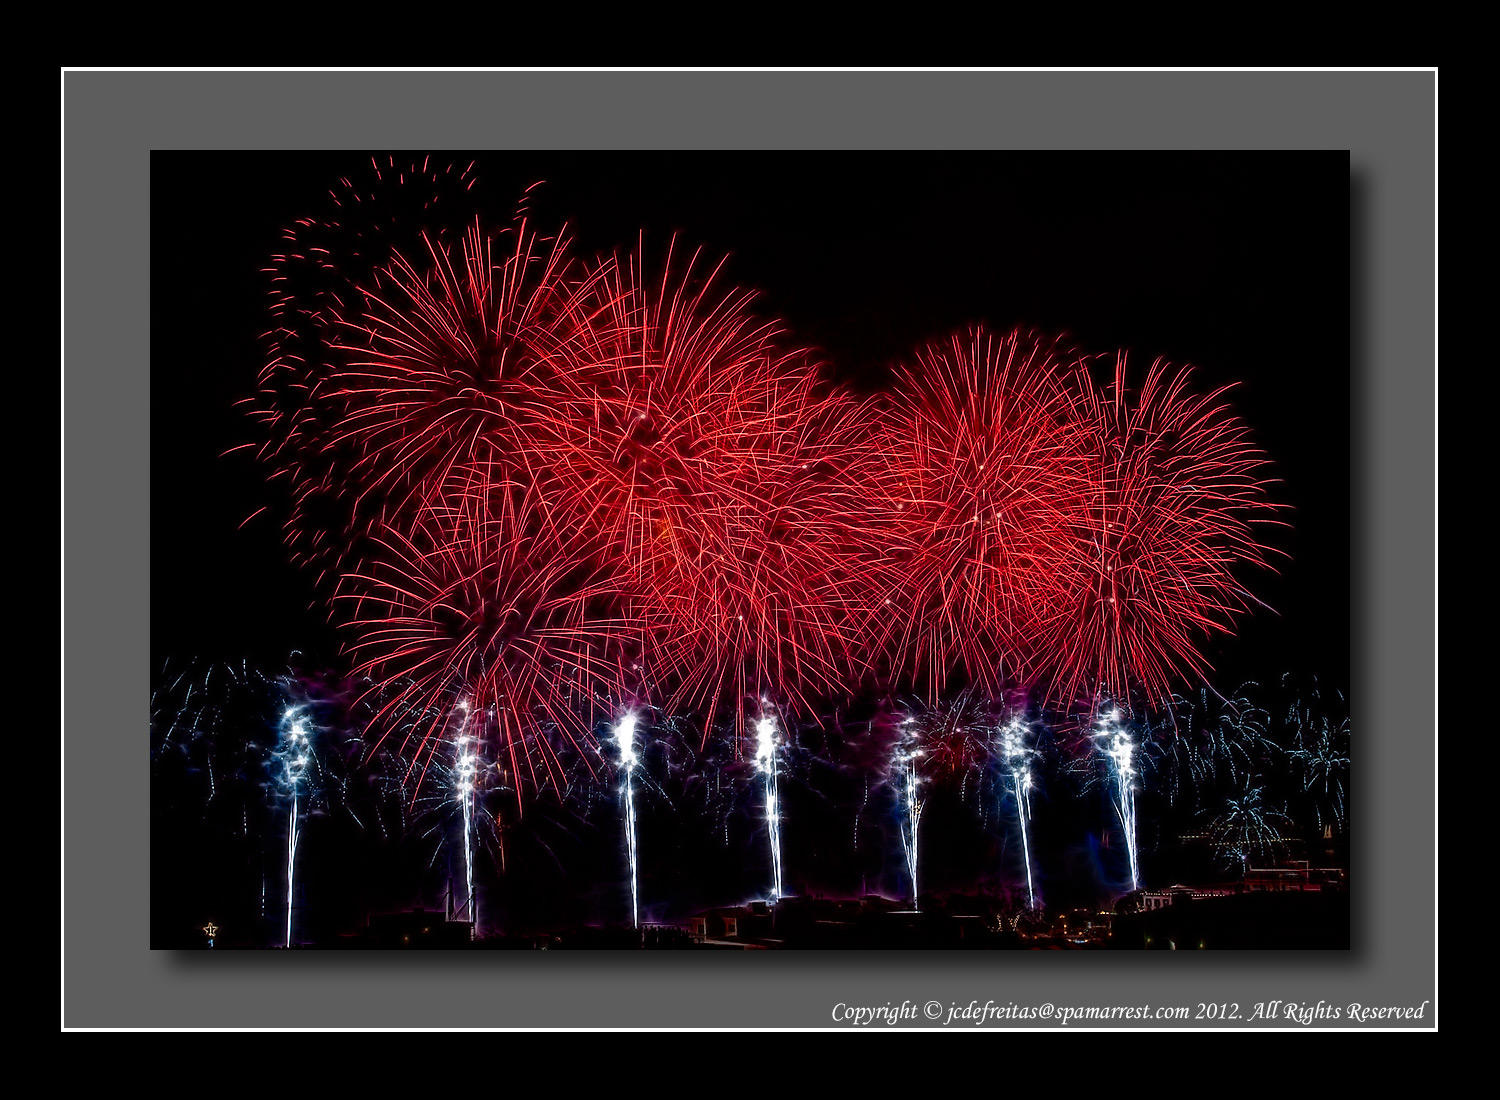 Fireworks - Funchal, Madeira - Portugal